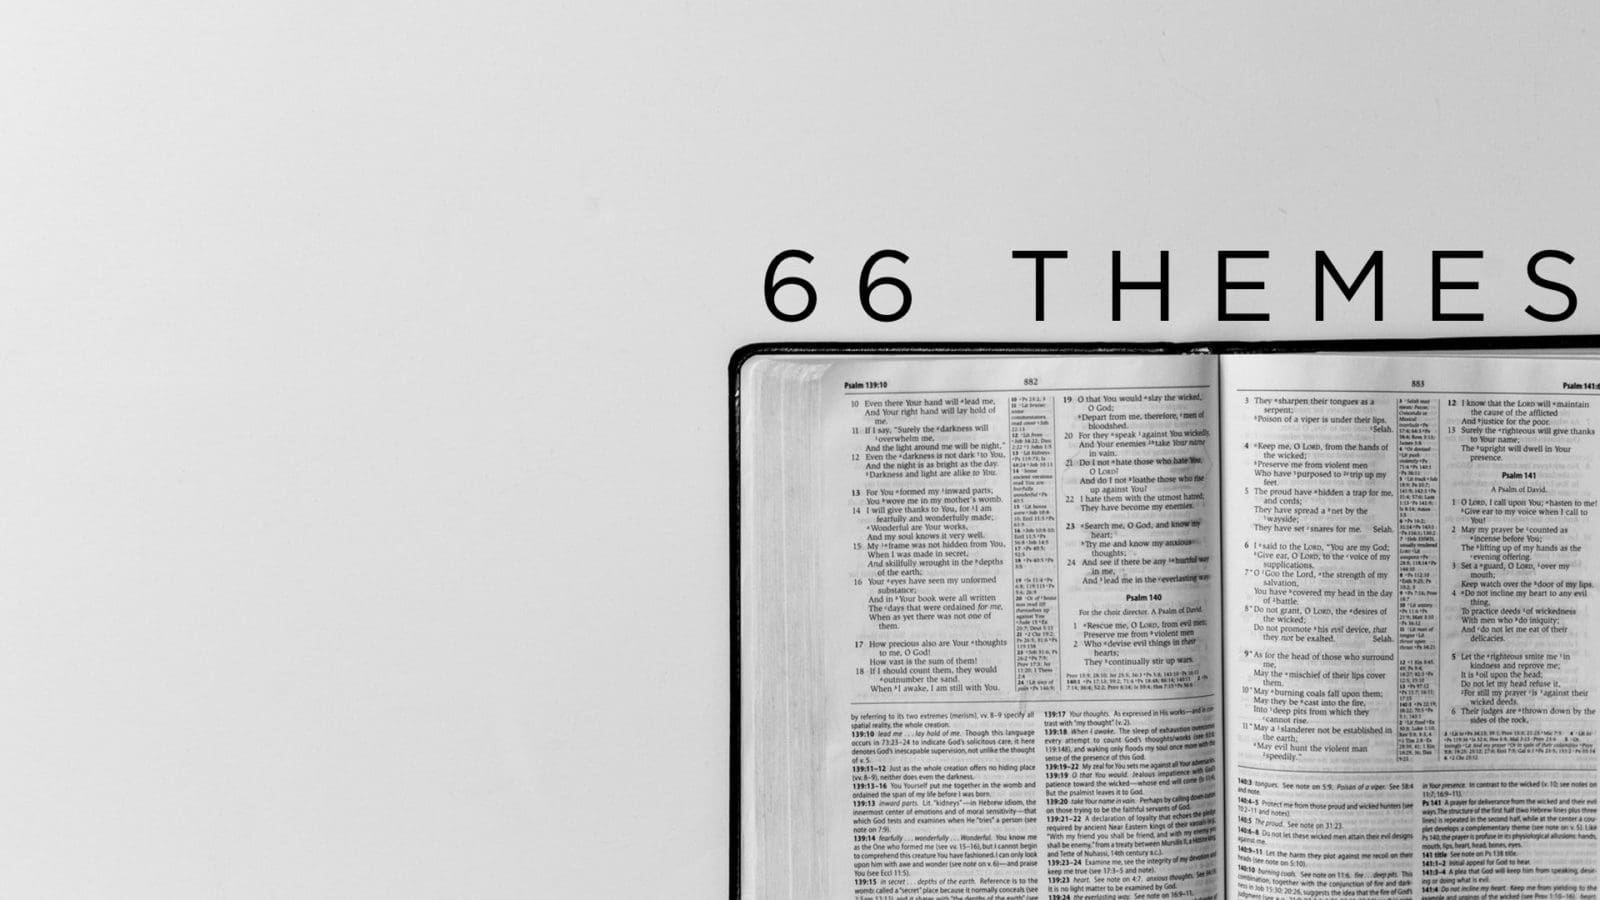 66 Themes [Memory Verse from Every Book in the Bible]